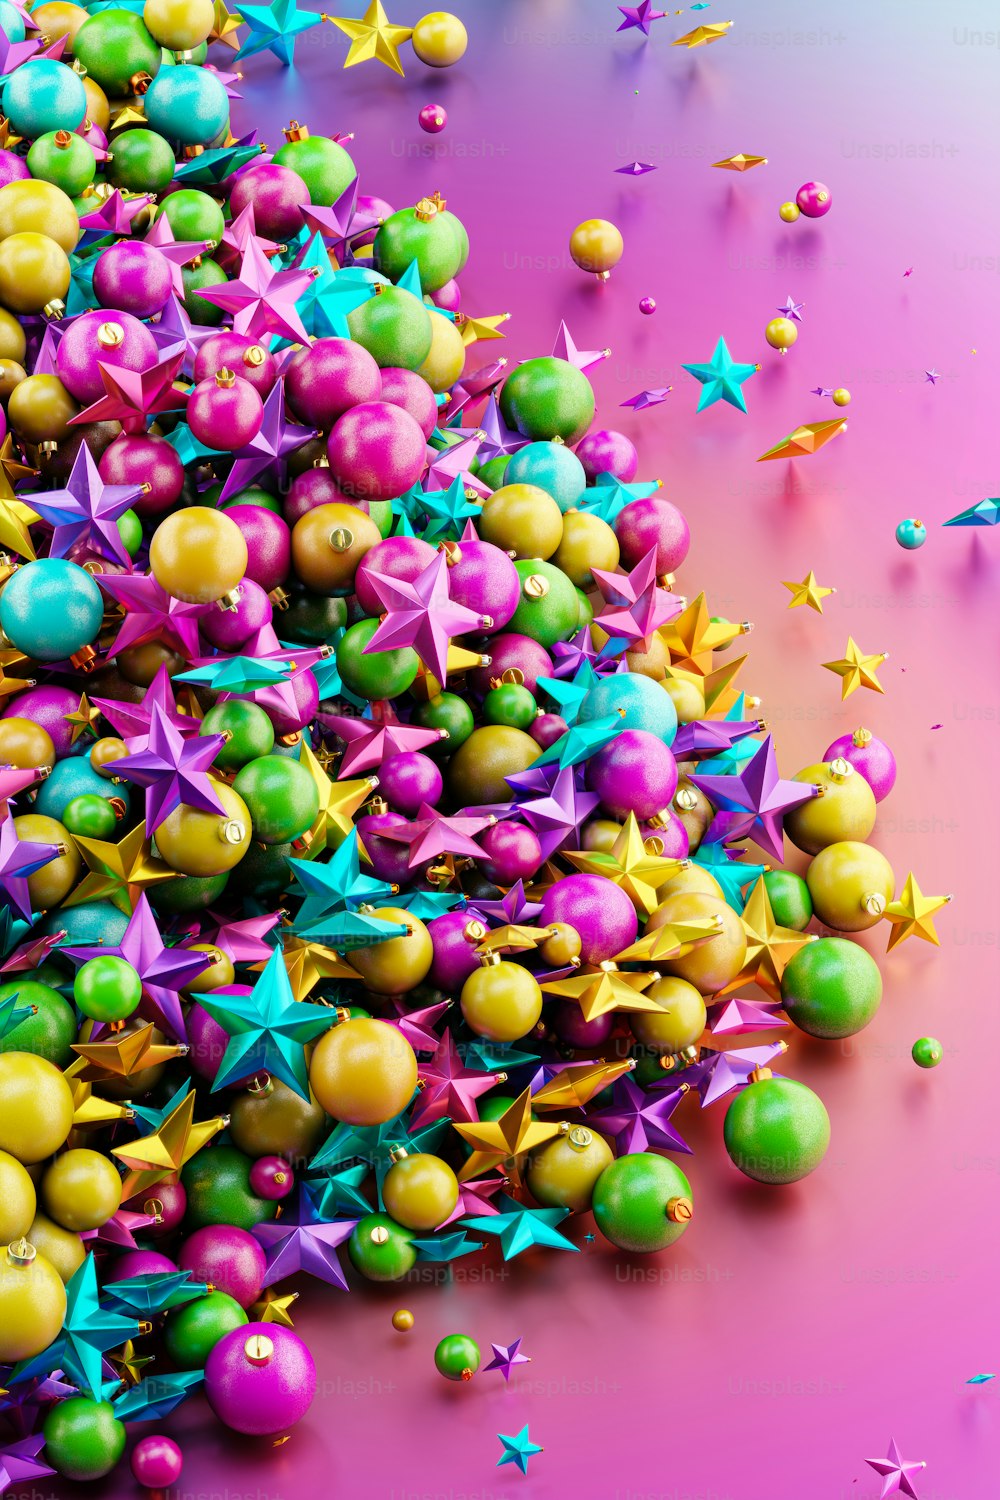 a pile of colorful stars and confetti on a pink background